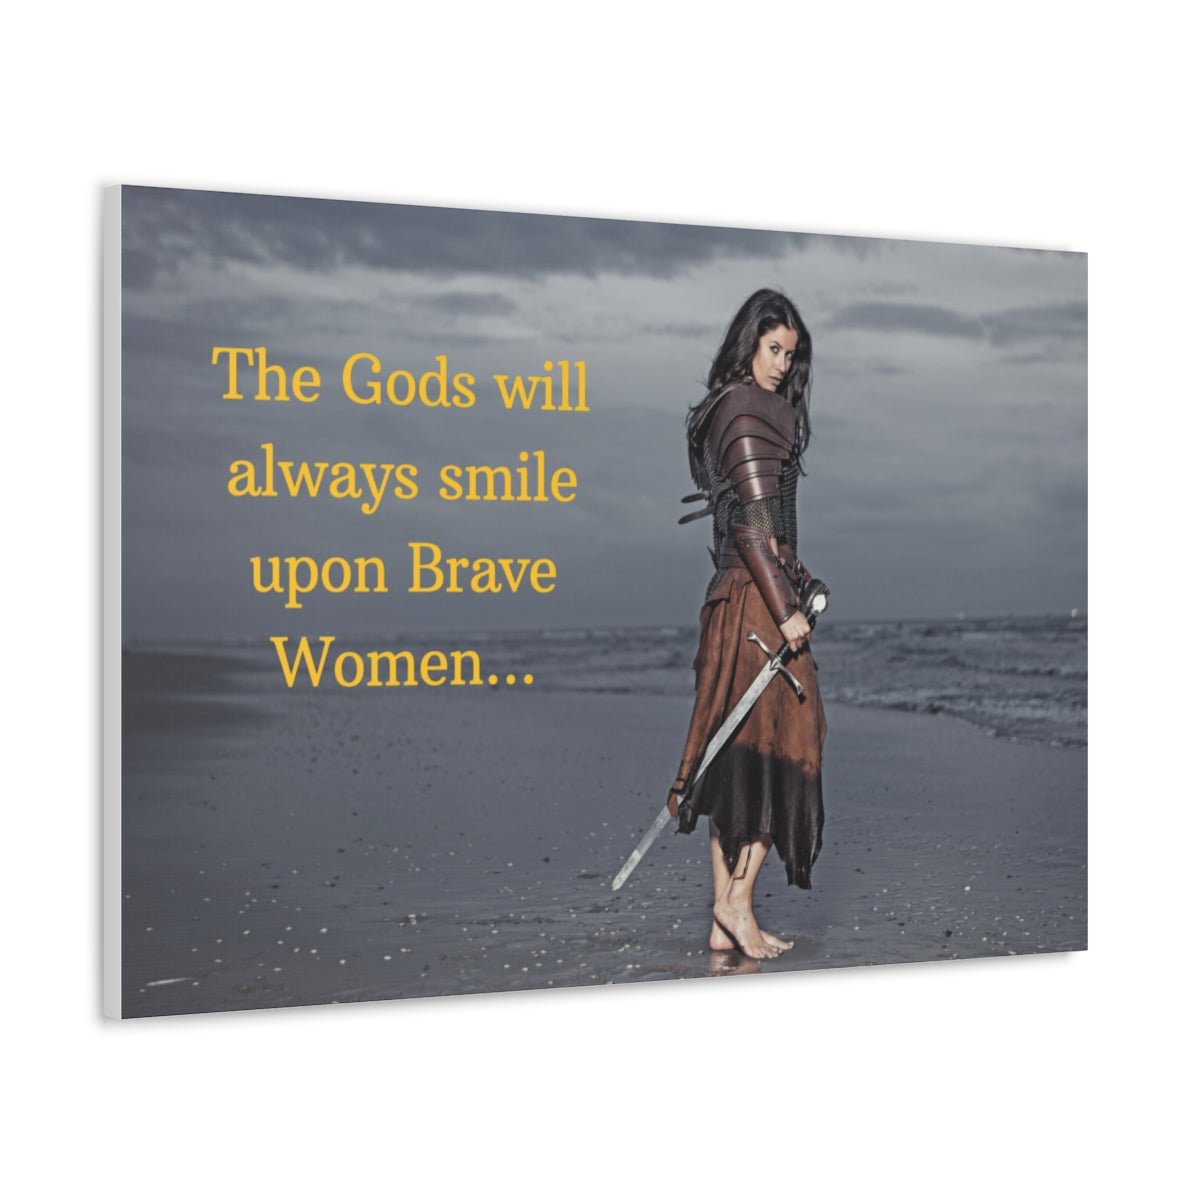 Viking Art on Canvas - &quot;The Gods will always smile upon Brave Women&quot;